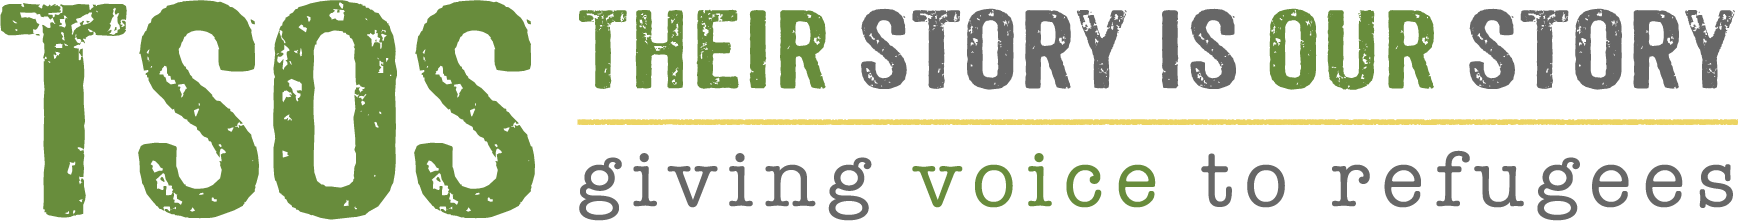 Their Story is Our Story Logo